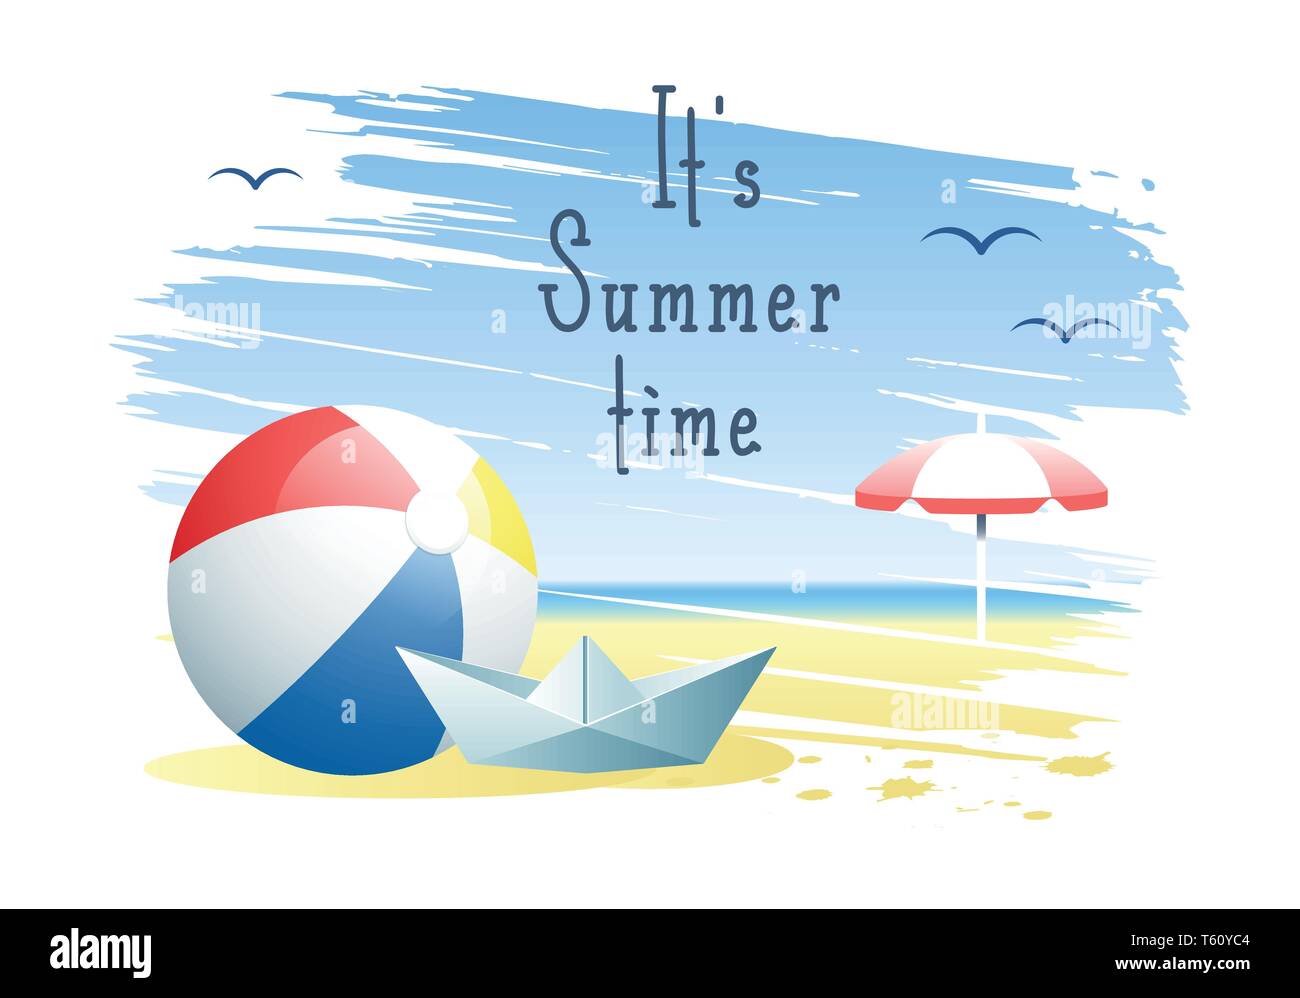 It's Summer Time. Beach ball with paper boat and beach umbrella on the sand beach background. Vector illustration. Stock Vector